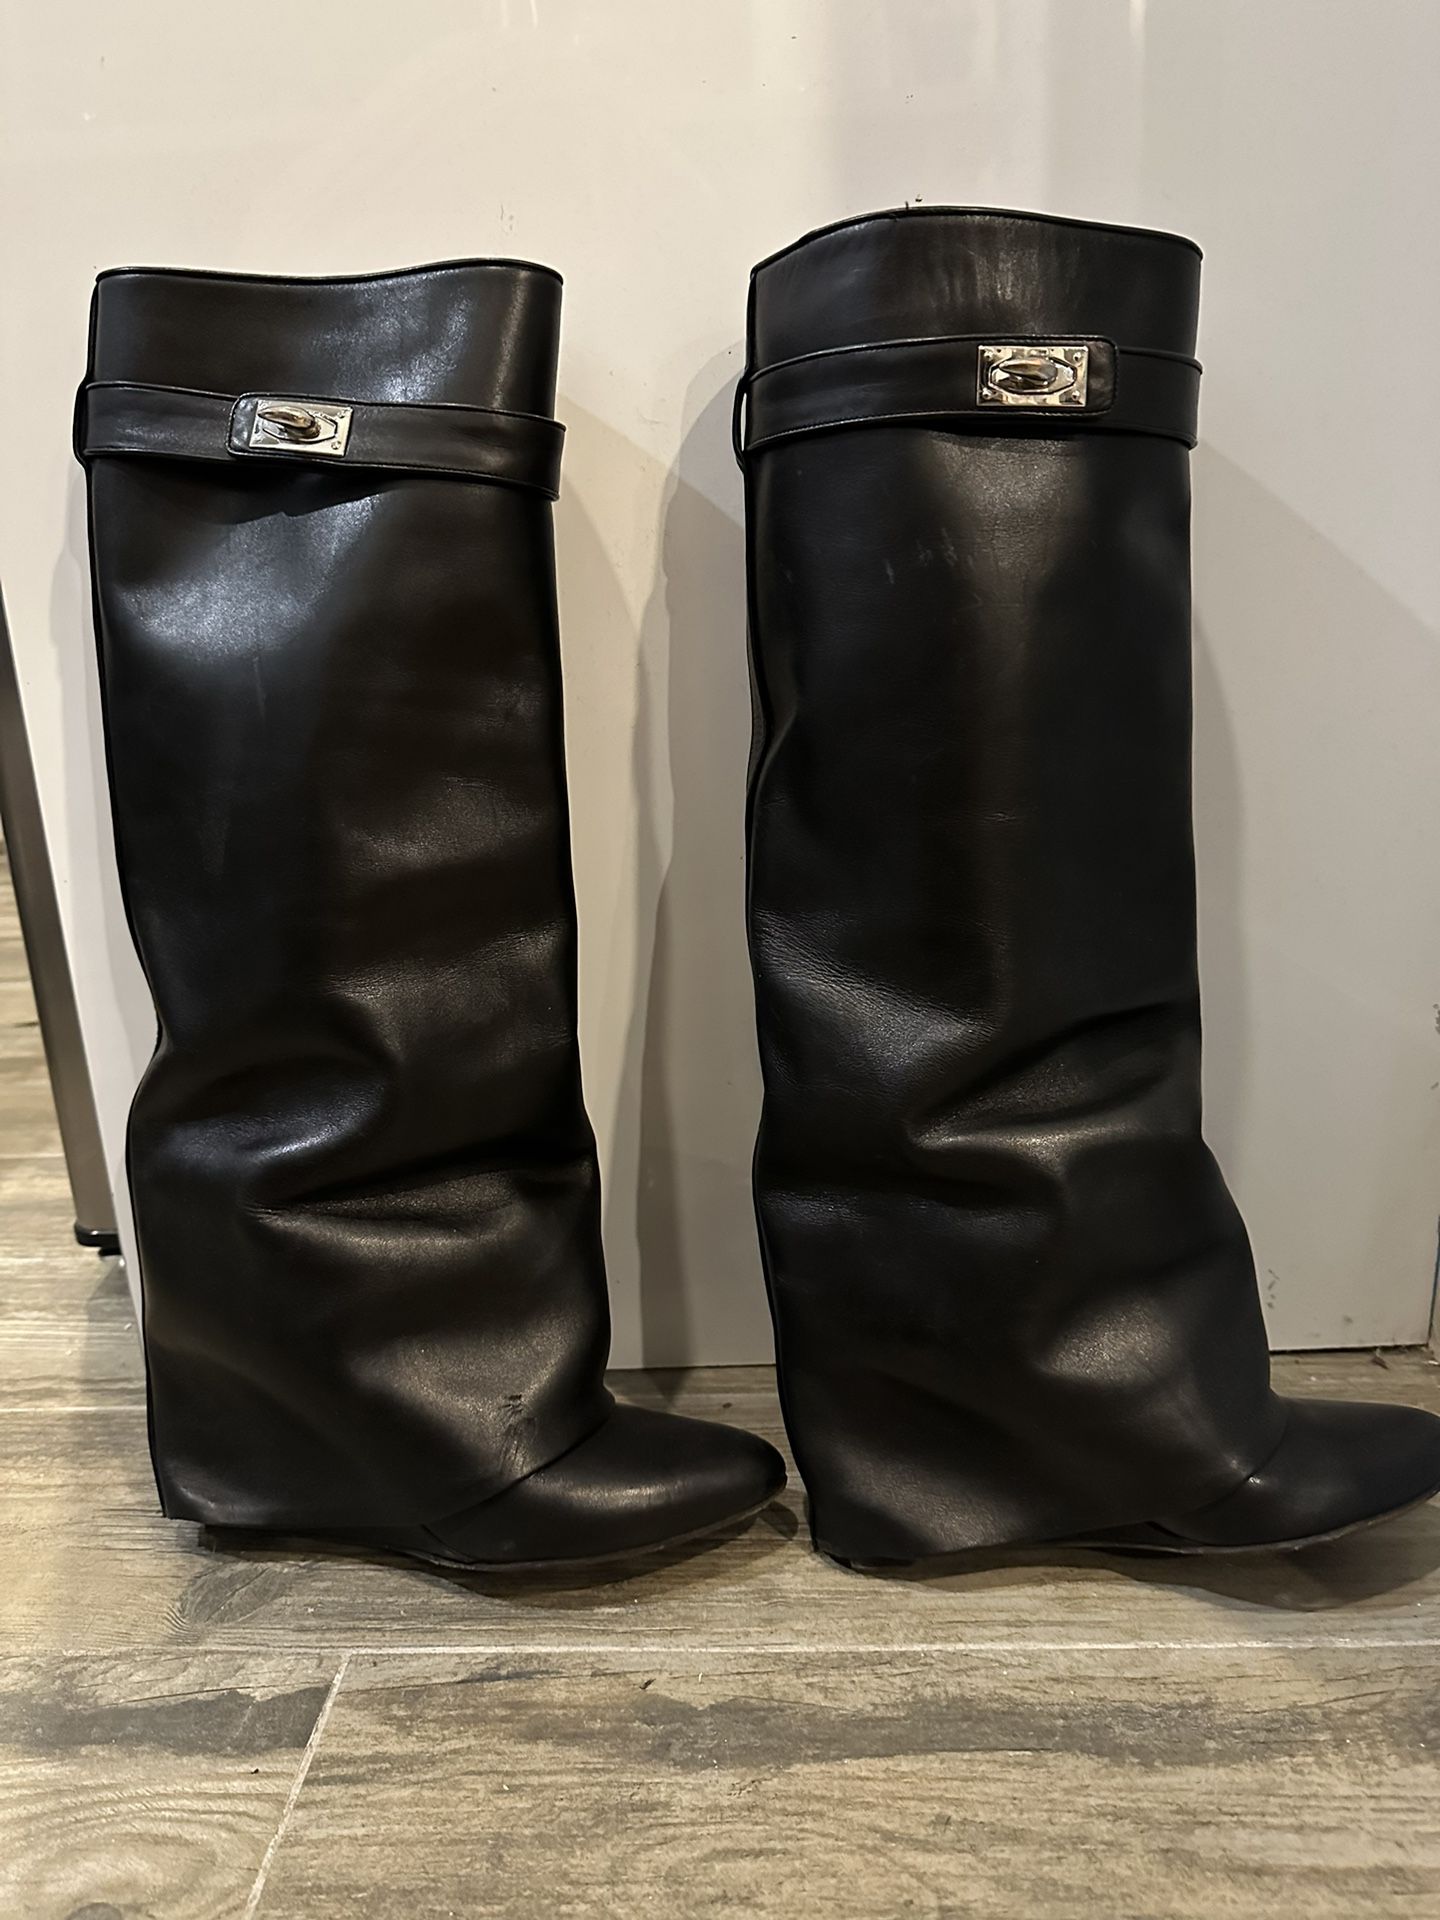 Givenchy Shark Boots for Sale in New York, NY - OfferUp